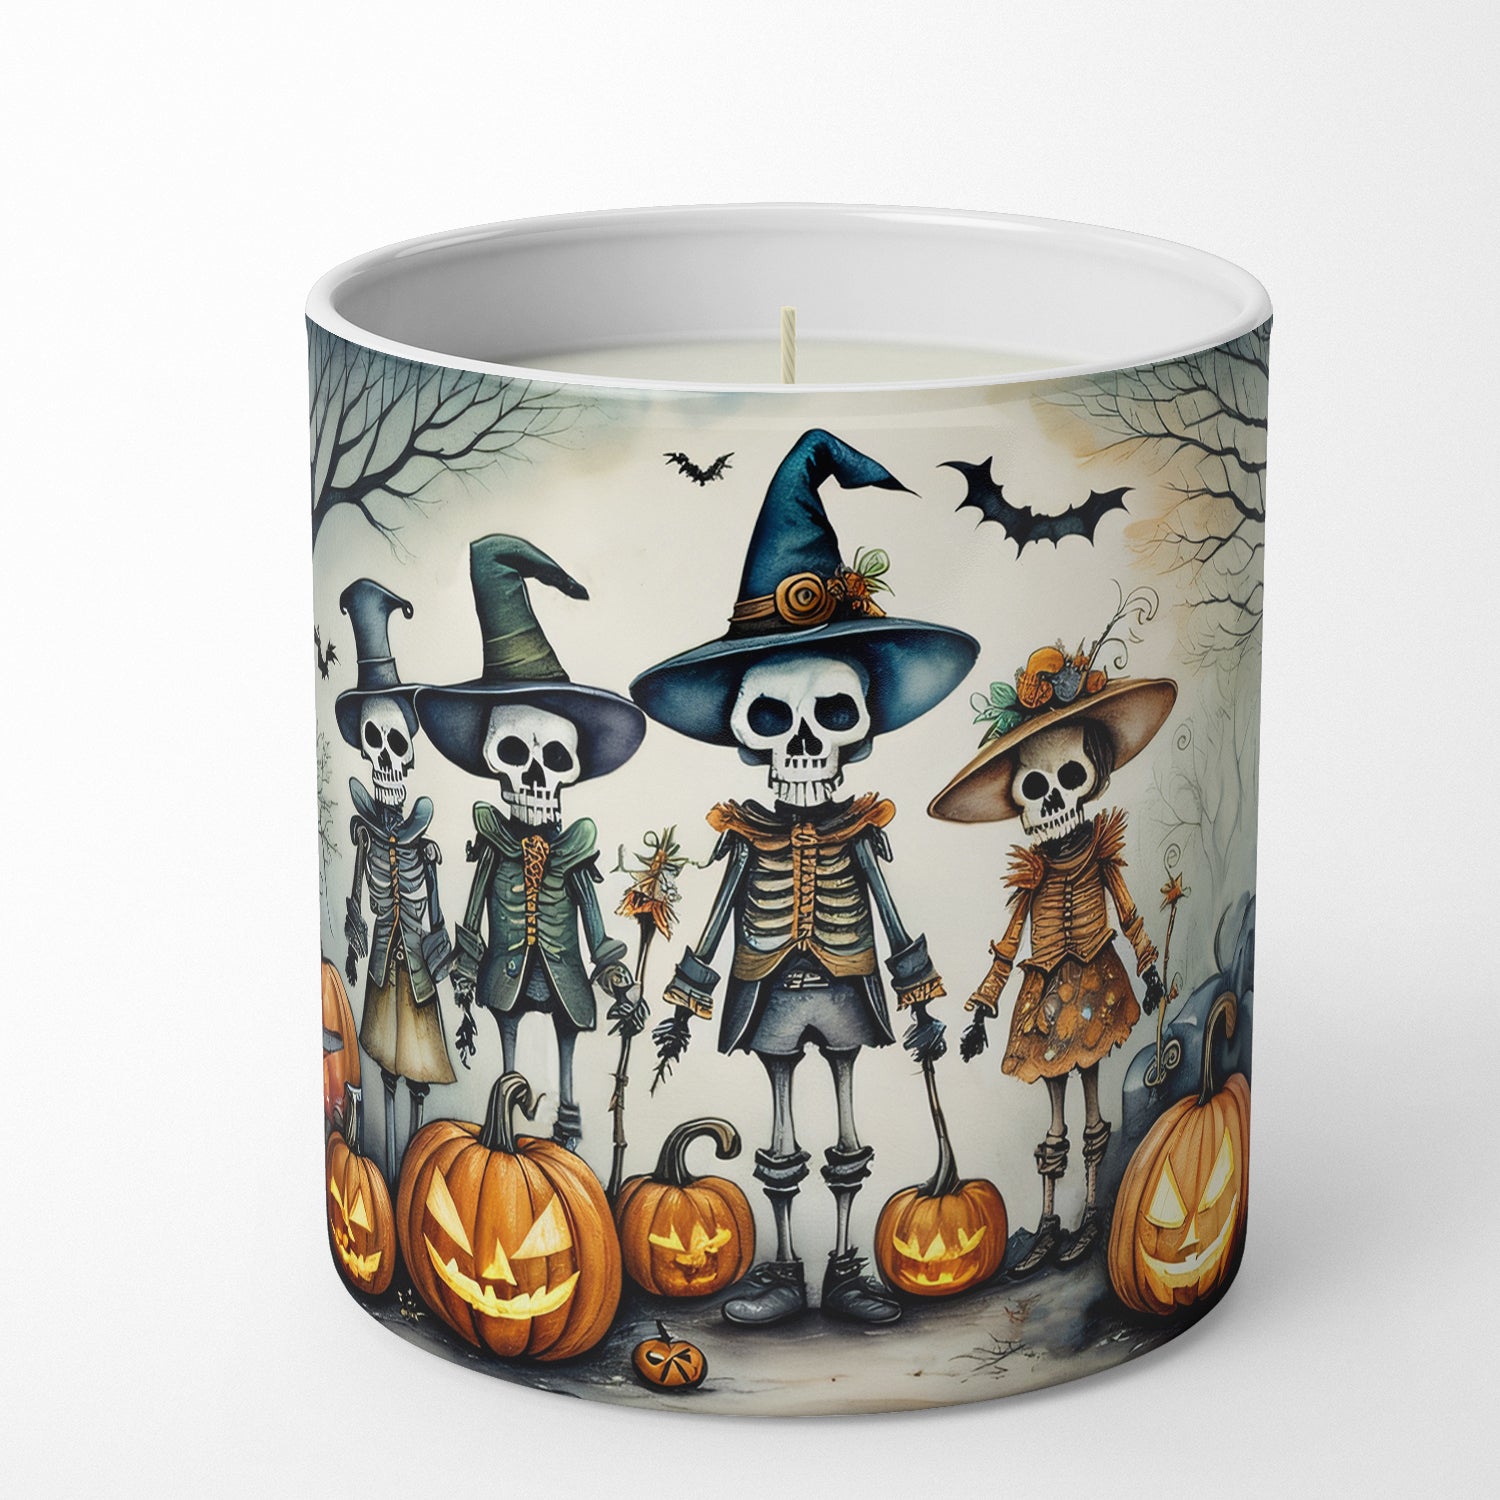 Buy this Calacas Skeletons Spooky Halloween Decorative Soy Candle